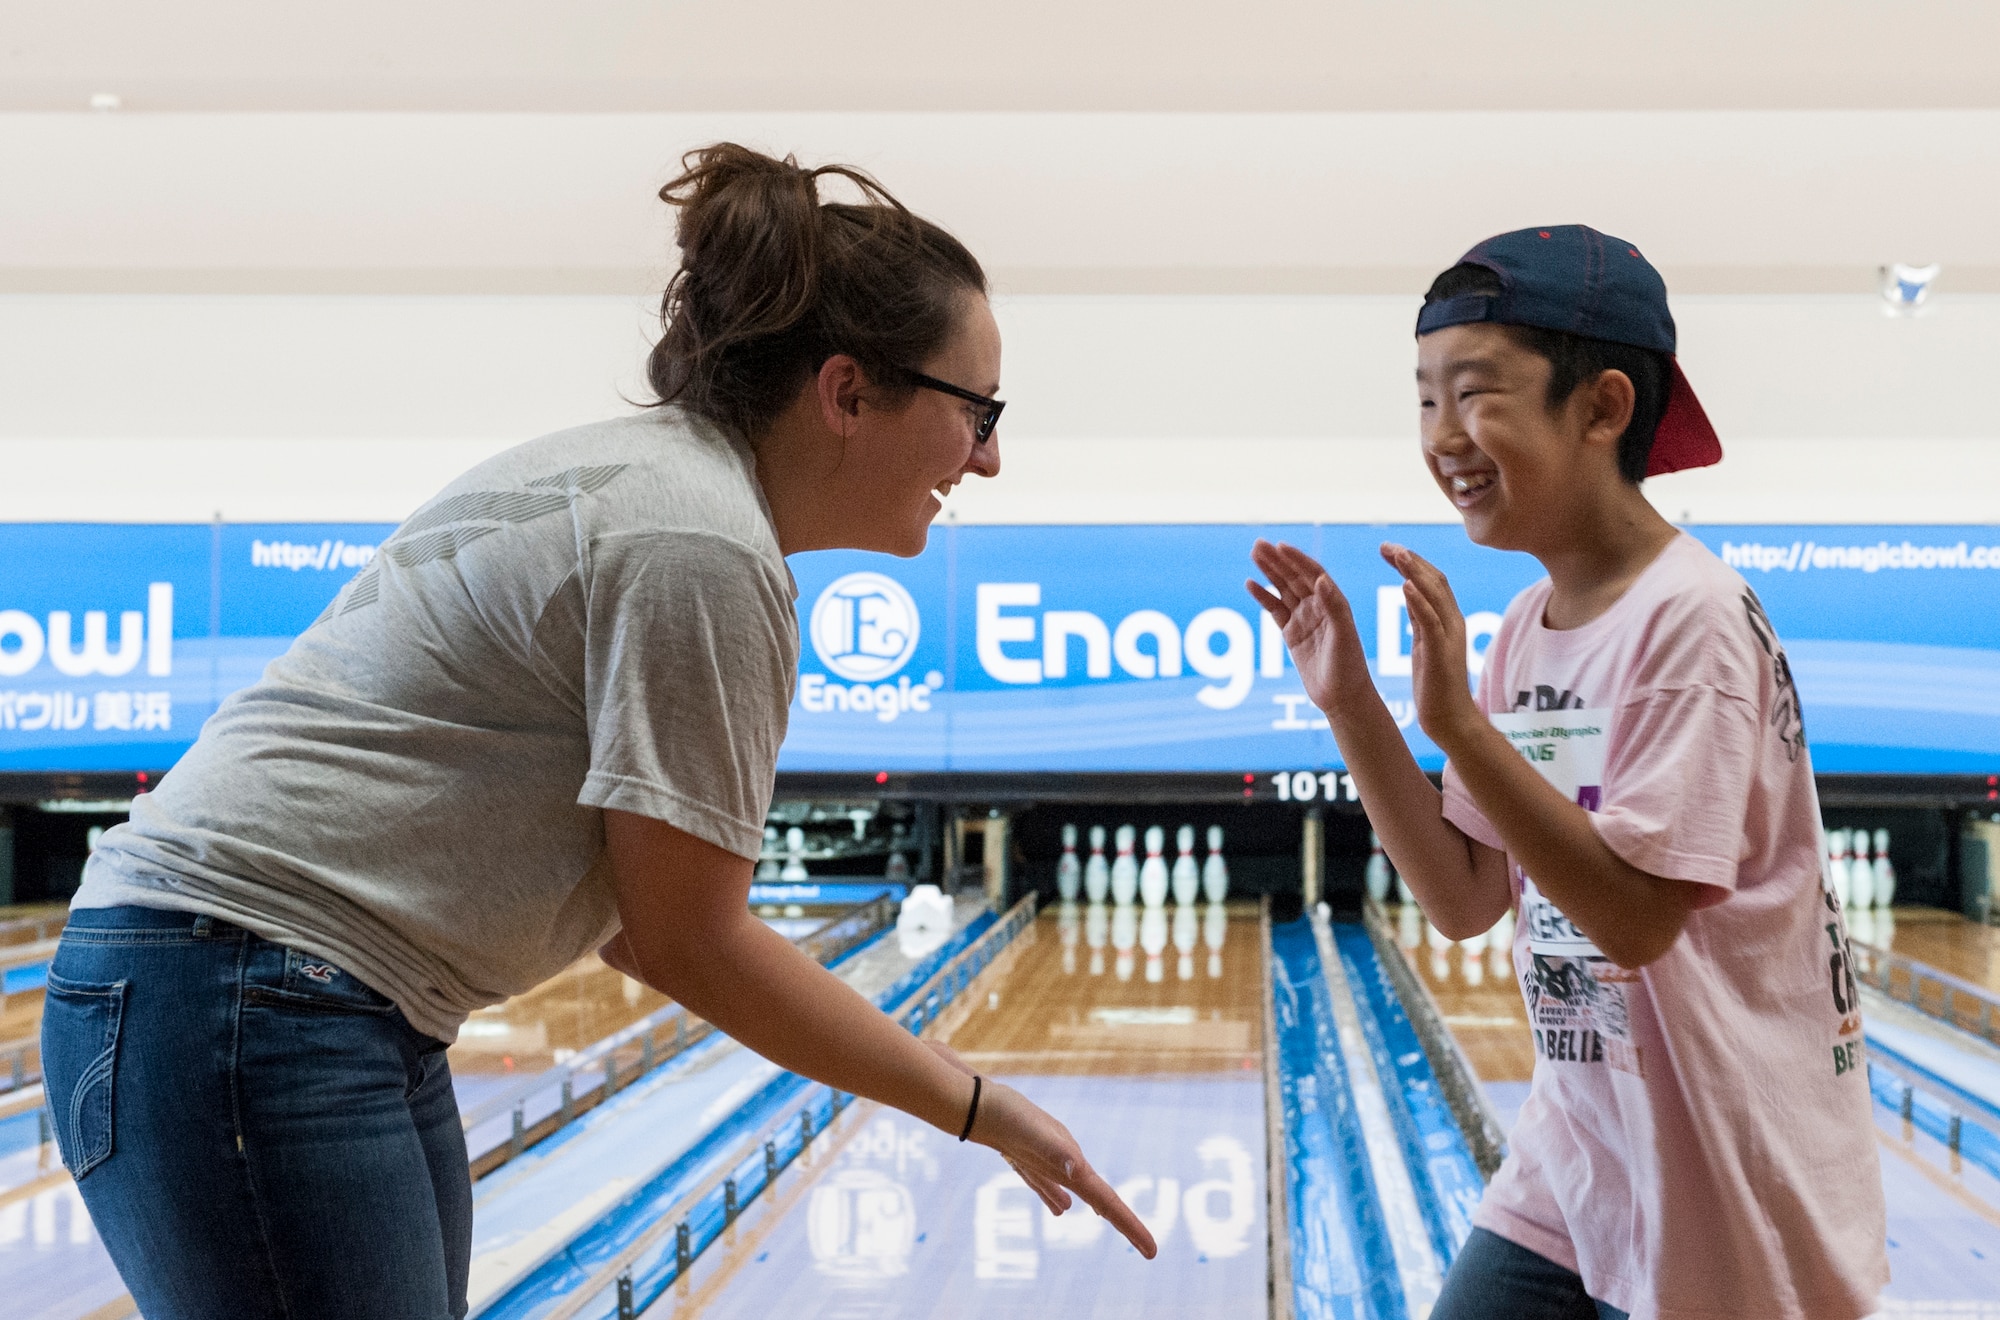 U.S. Air Force Staff Sgt. Rachel McCoy, 18th Logistic Readiness Squadron central storage supervisor, and Yuto, Kadena Special Olympics Athlete, high five each other after Yuto rolls the bowling ball during the KSO bowling event at Enagic Bowling in Mihama, Japan, Sept. 19, 2015. Airmen from Kadena Air Base volunteered to fill each lane and assist the athletes as they bowled. (U.S. Air Force photo by Airman 1st Class Corey M. Pettis)